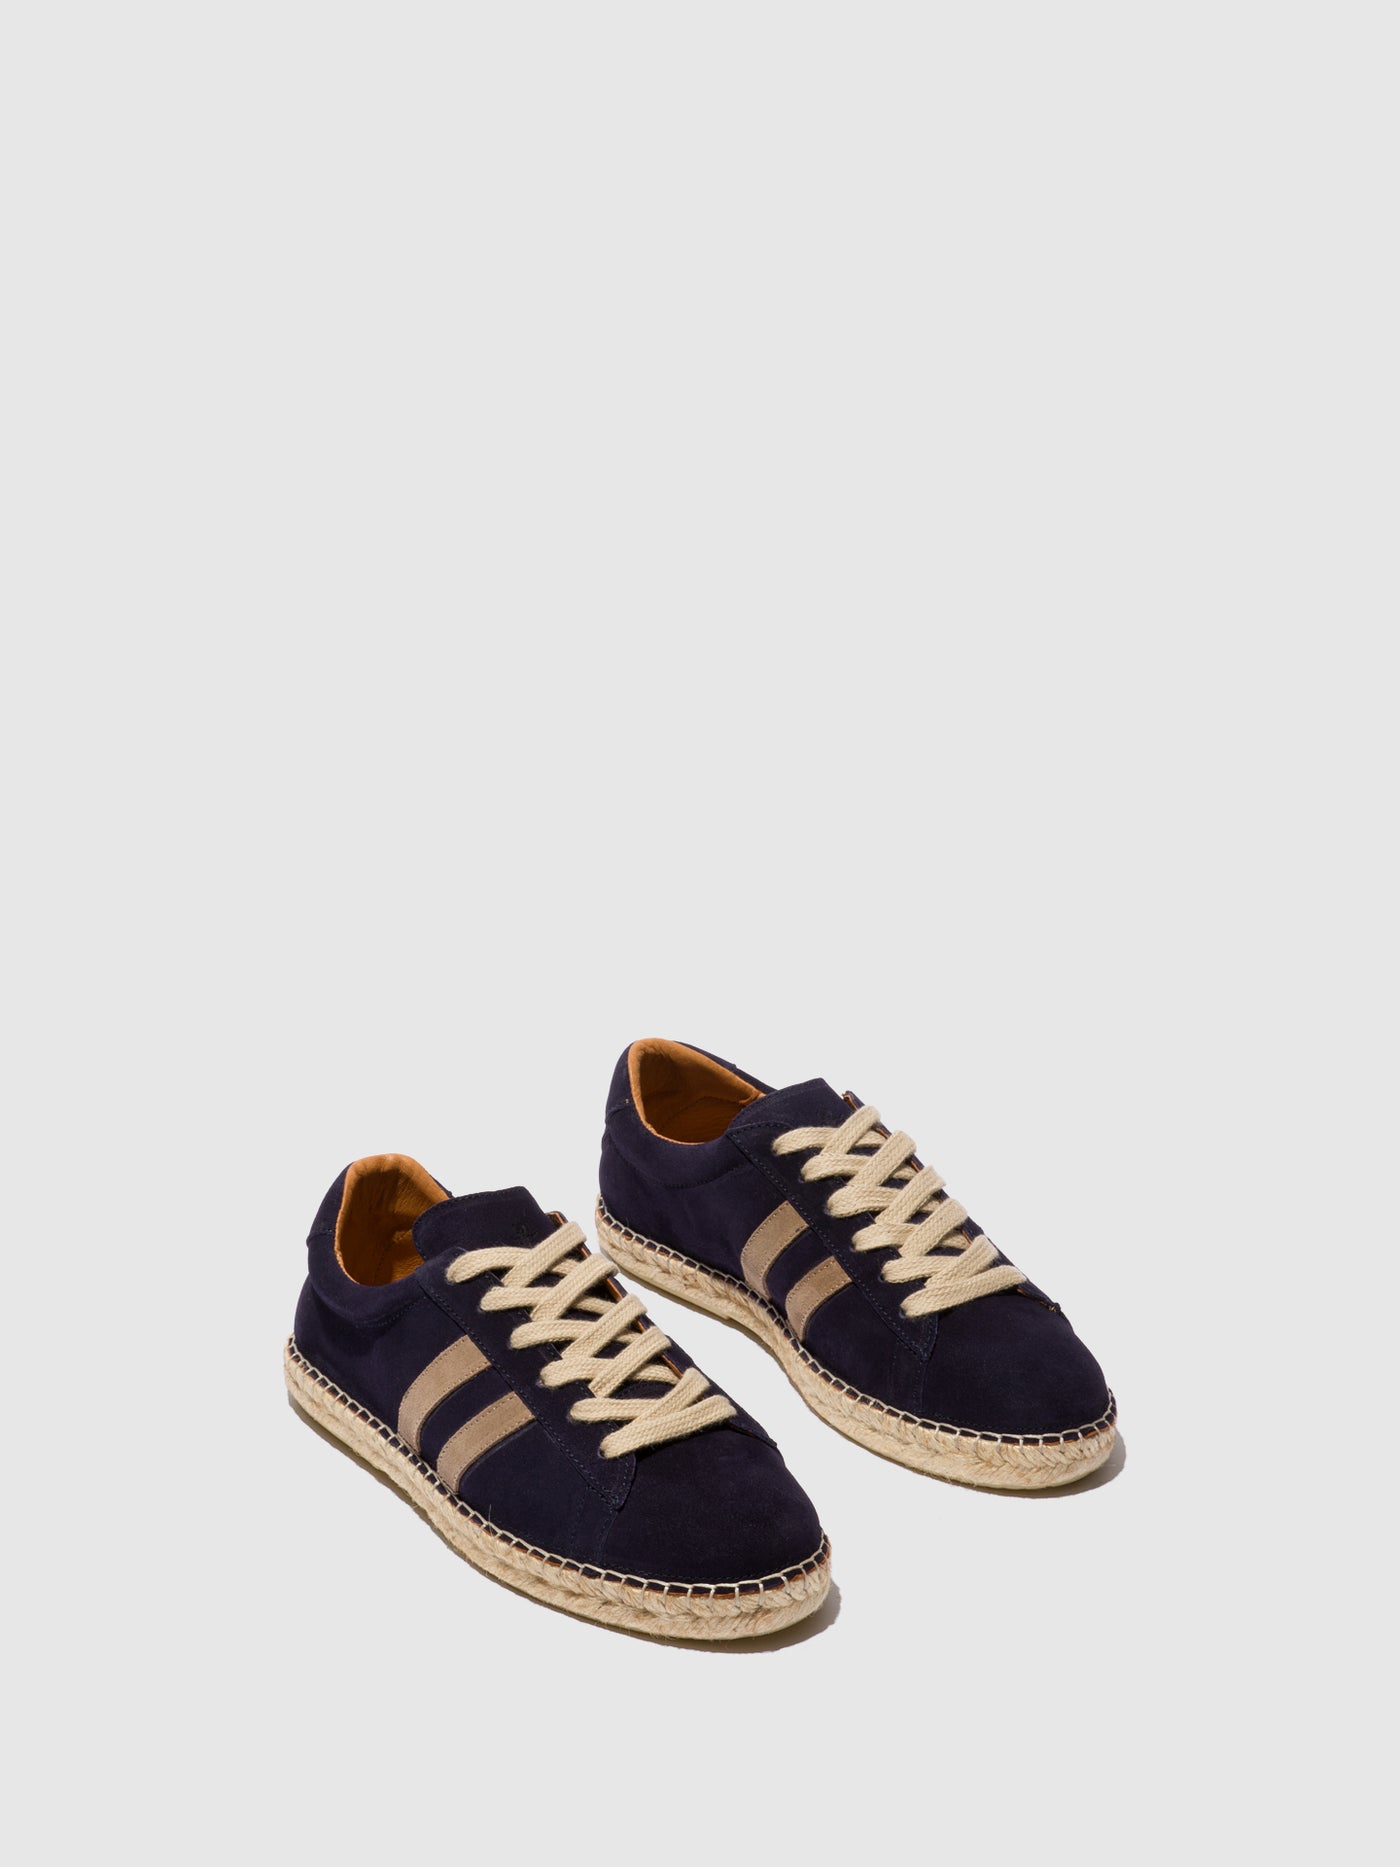 Lace-up Espadrilles SCAW530FLY NAVY/SAND